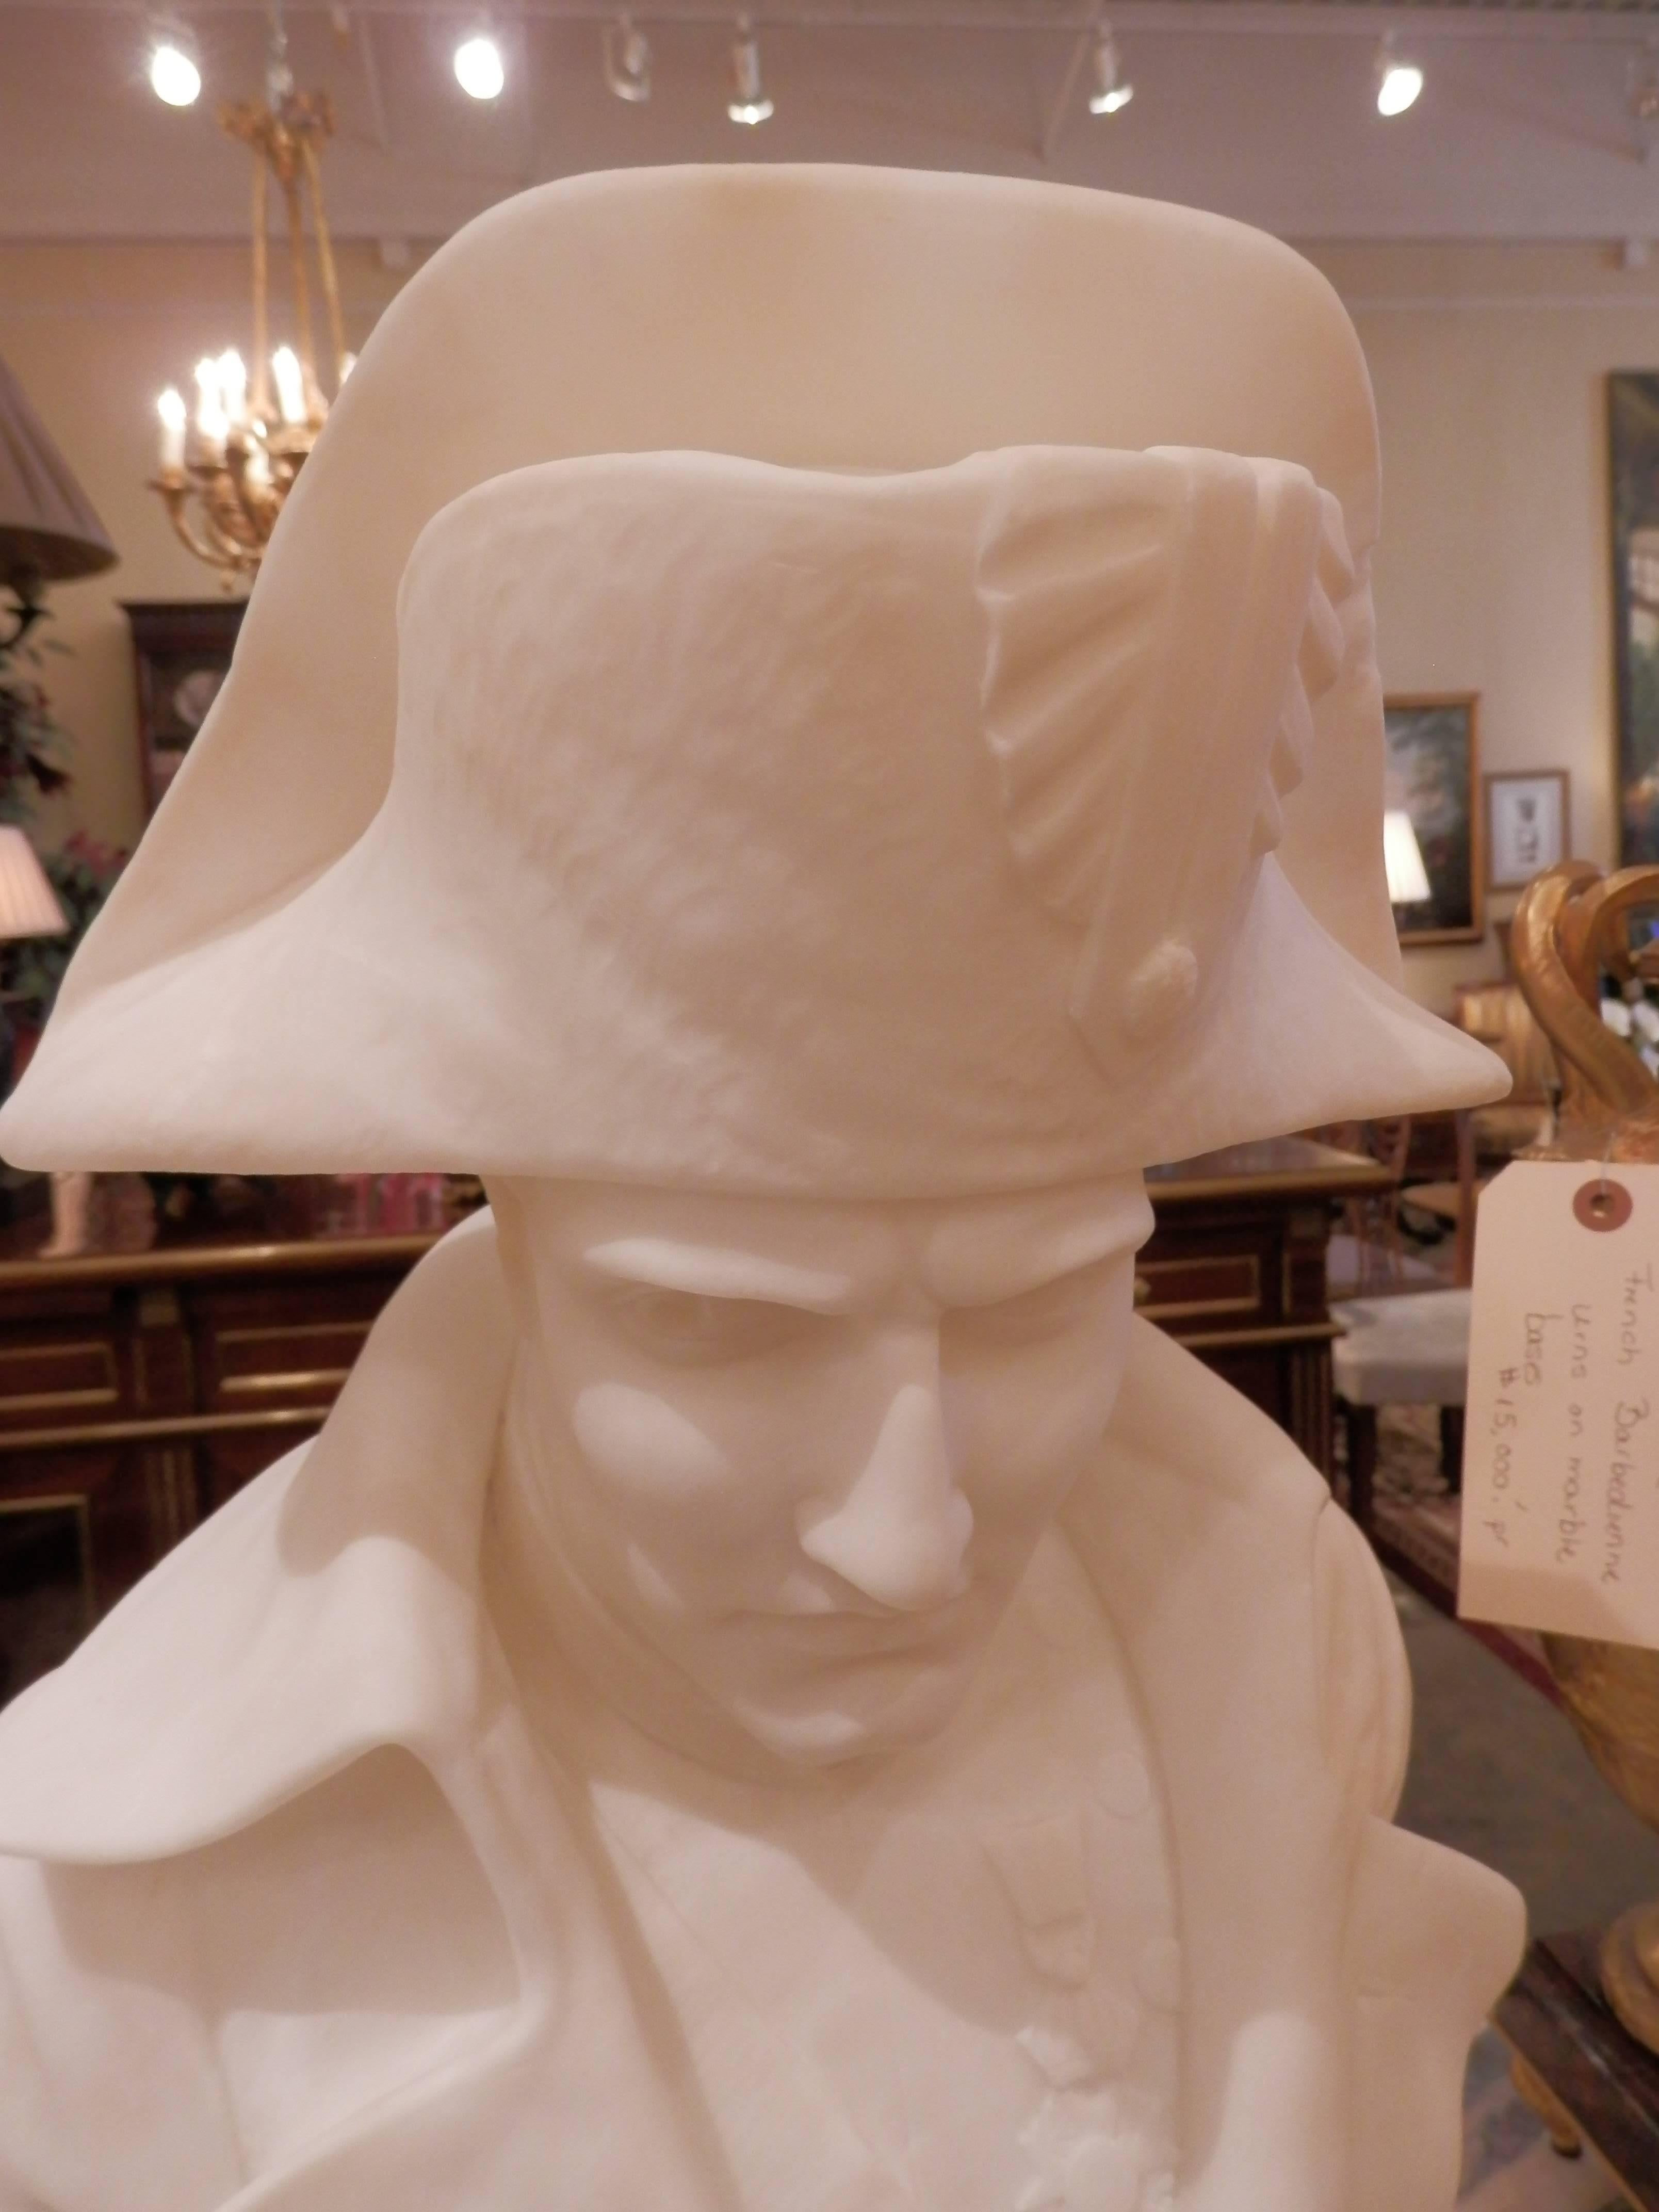 19th century French Carrara marble signed bust of Napoleon.

Napoleon in bicorne hat and wearing Honor of Legions medal on his chest.

Black marble base.